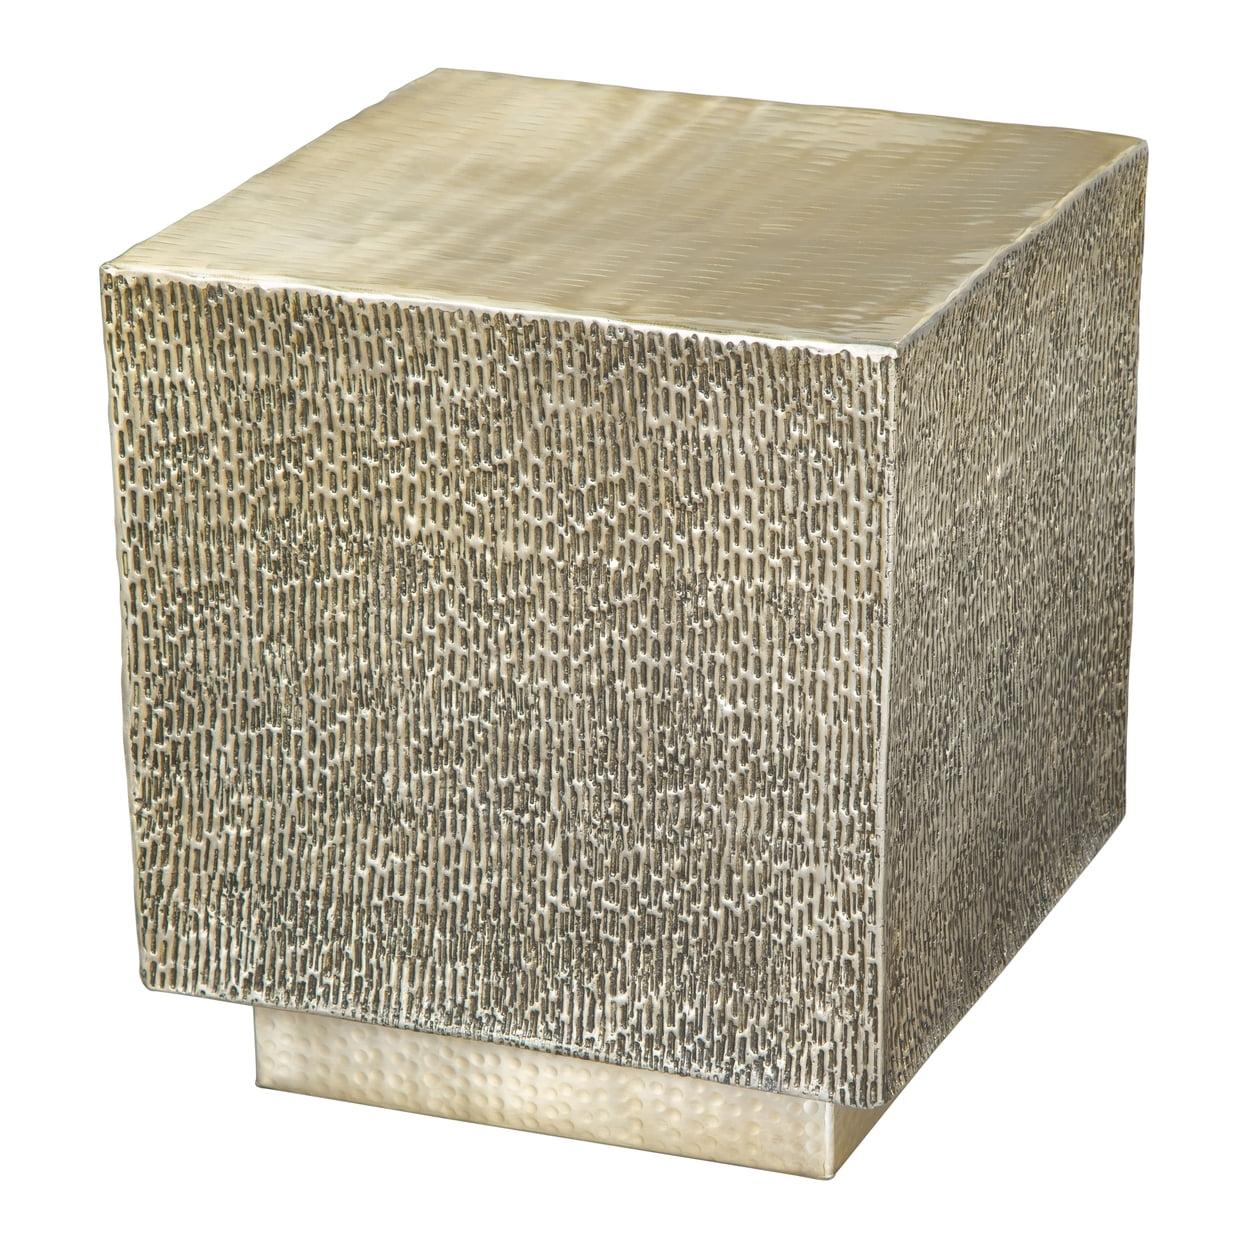 Contemporary Gold Metal Square Side Table with Bark-Inspired Texture